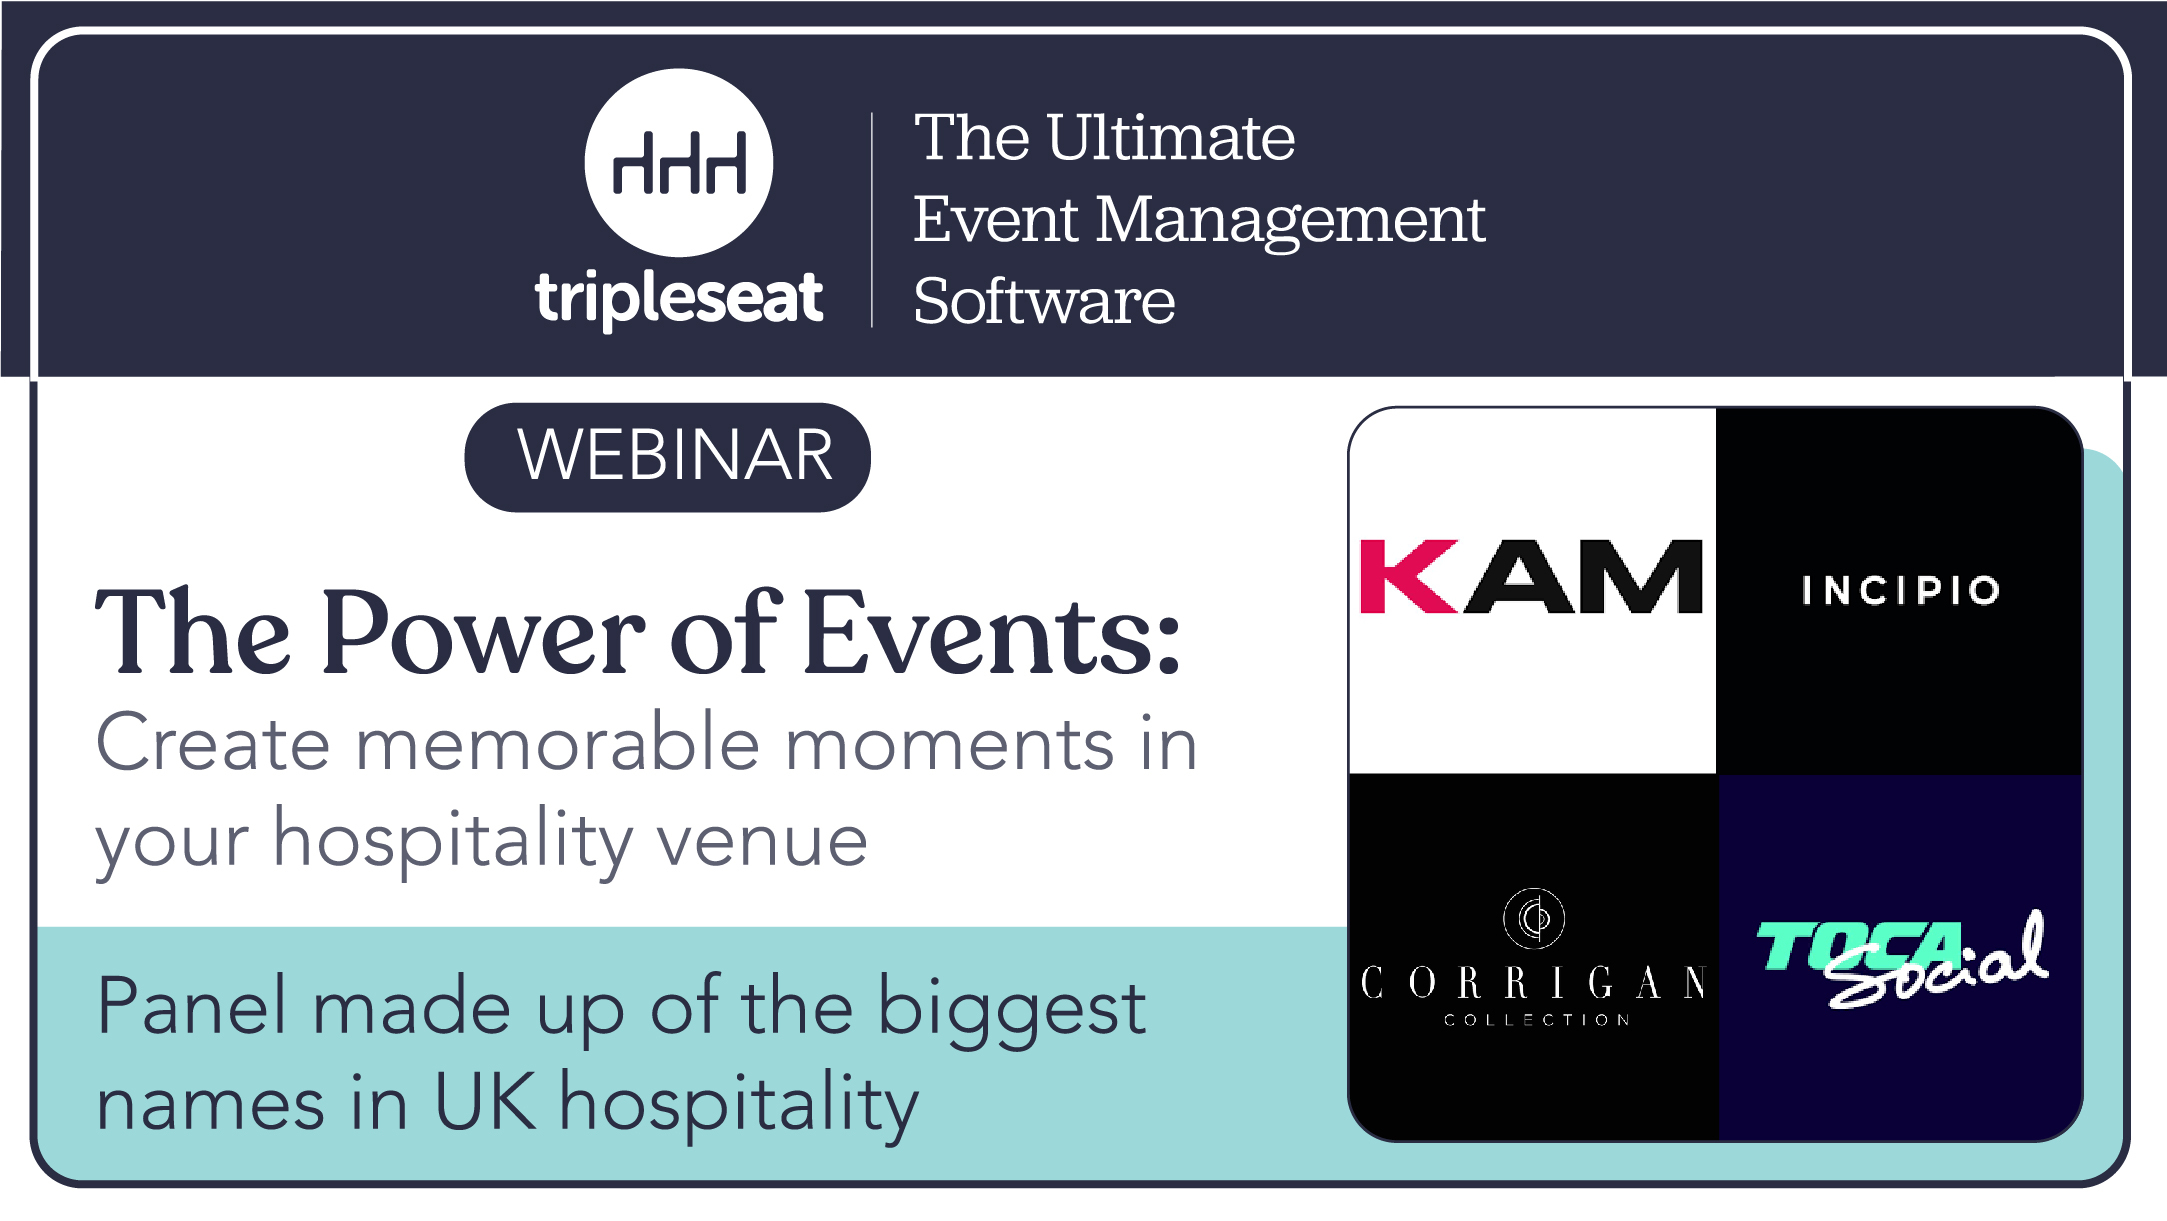 The Power of Events: Creating Memorable Moments in your hospitality venue